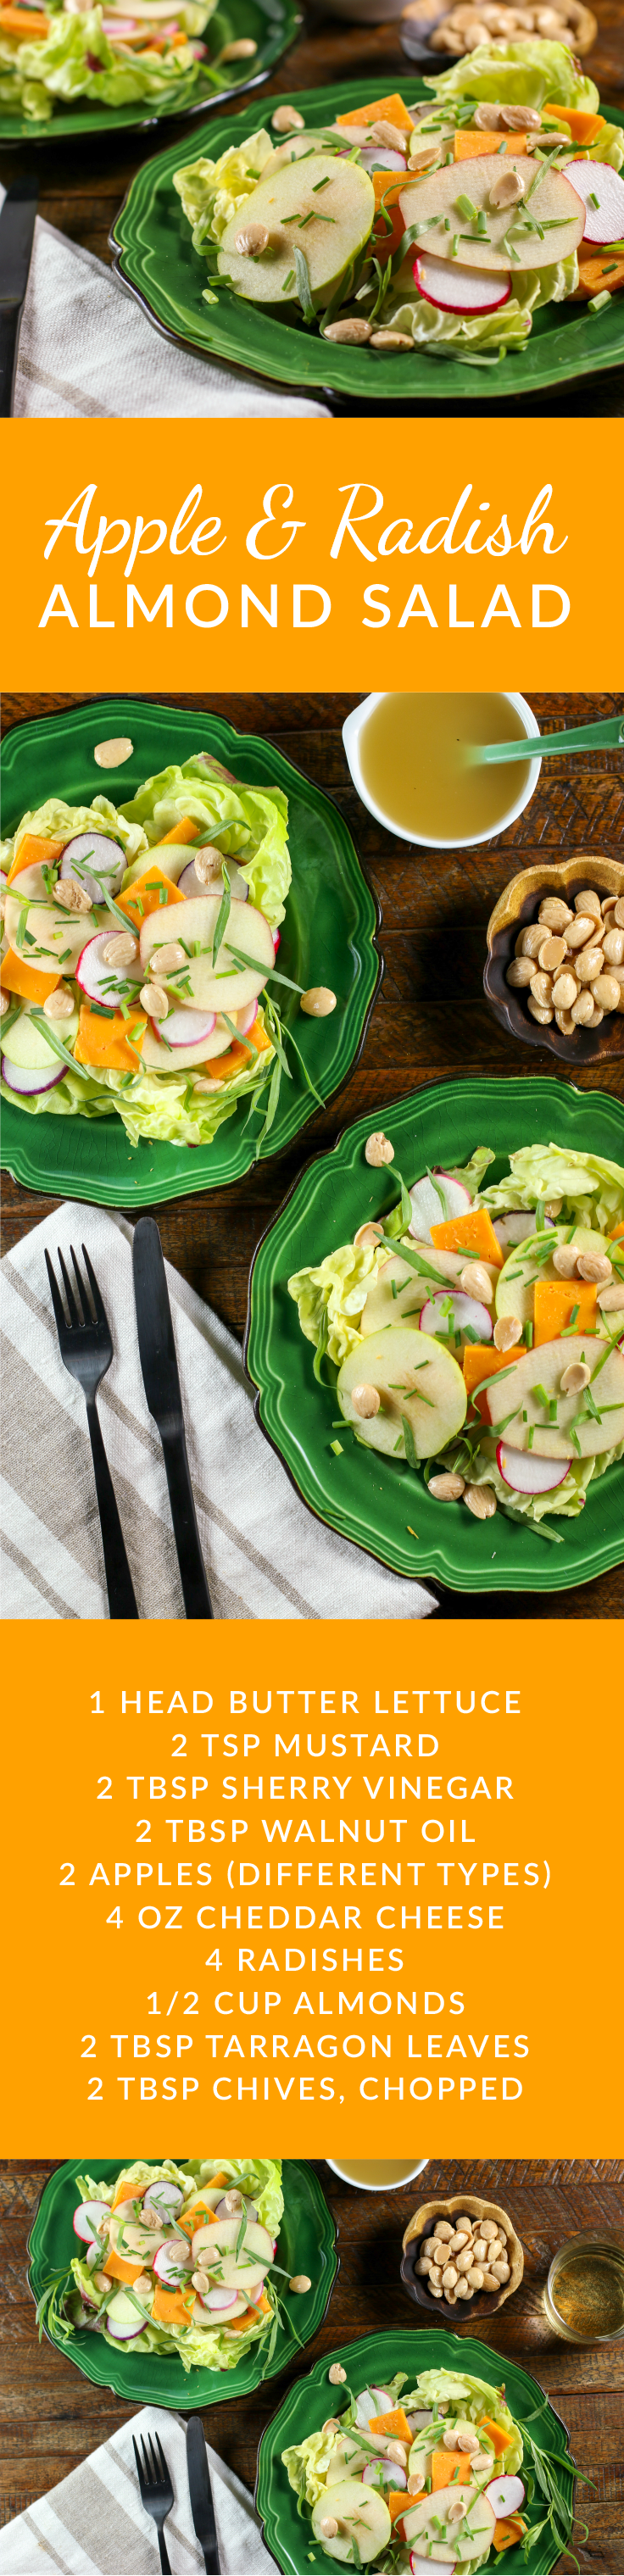 This layered apple, radish, cheddar cheese and Marcona almond salad was inspired by a similar salad served at Mesa Restaurant in Costa Mesa, California. 